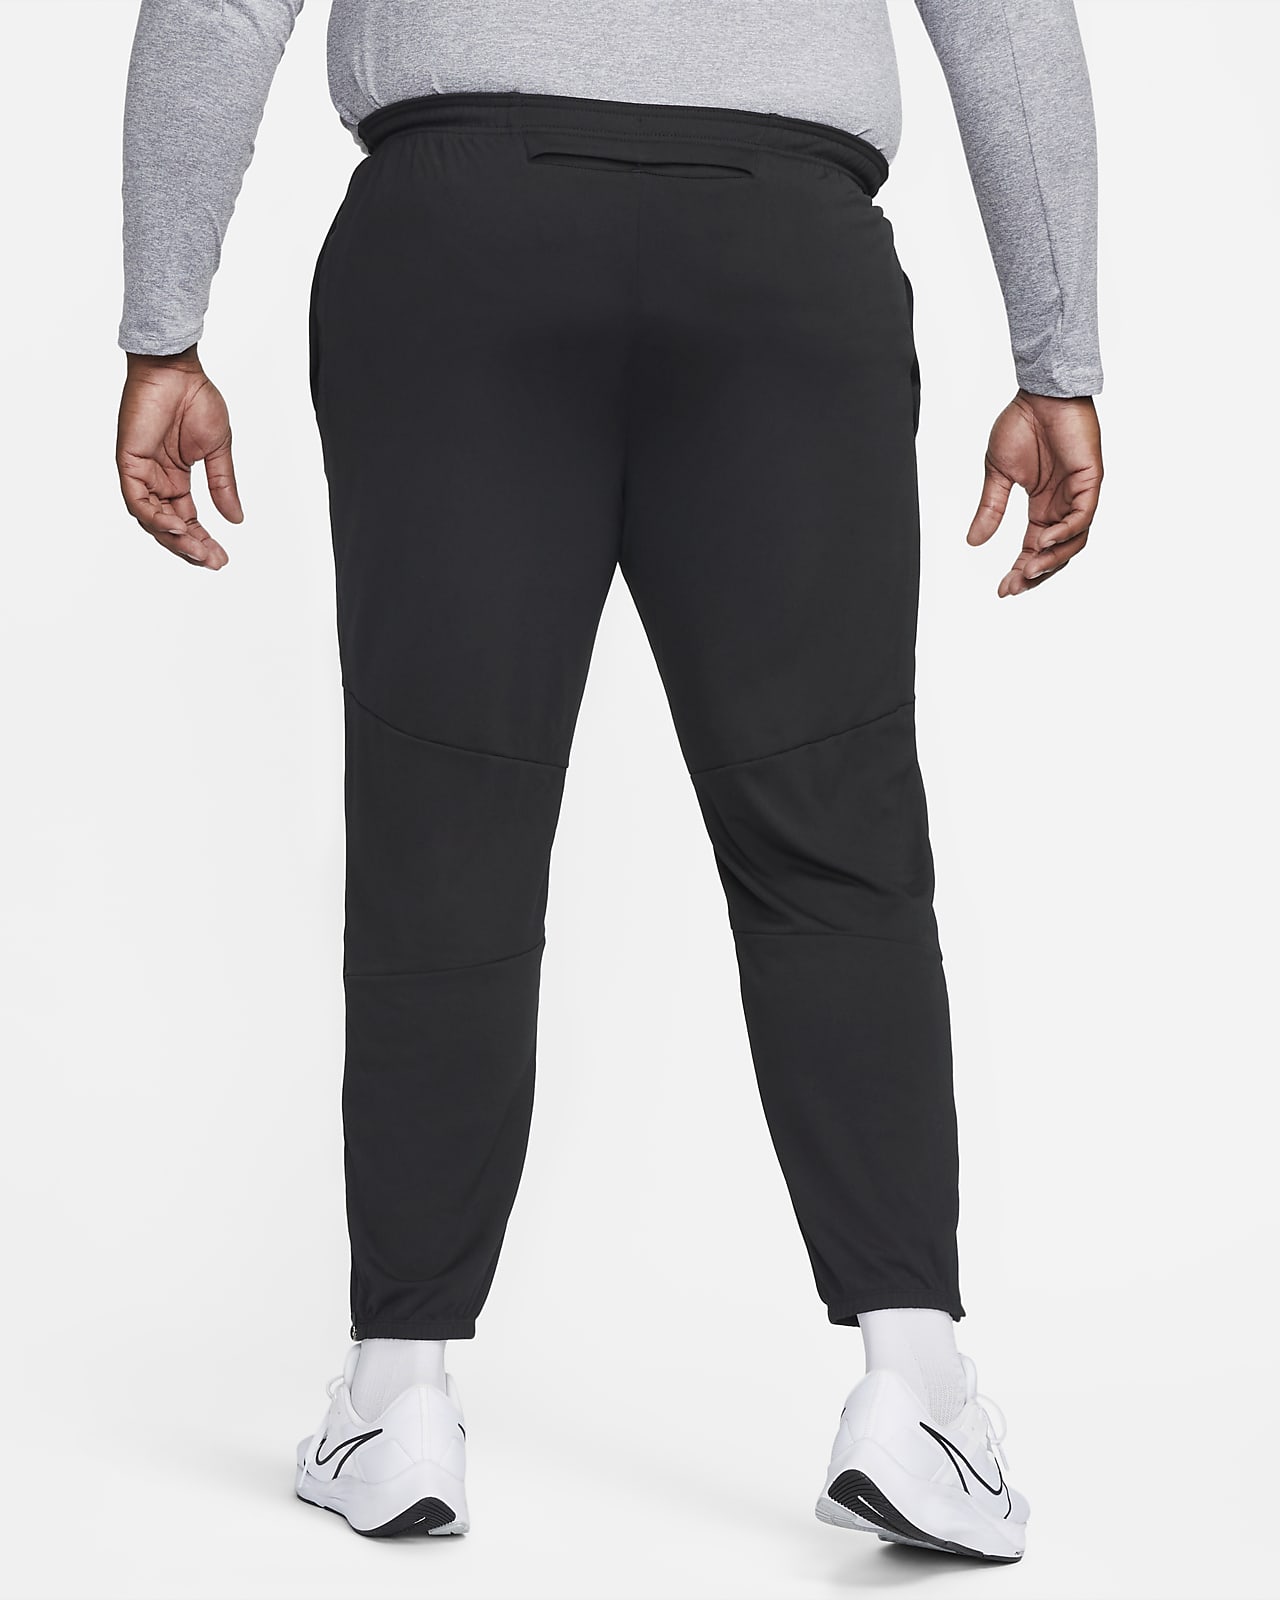 Nike Dri-FIT Challenger Men's Knit Running Trousers. Nike AE